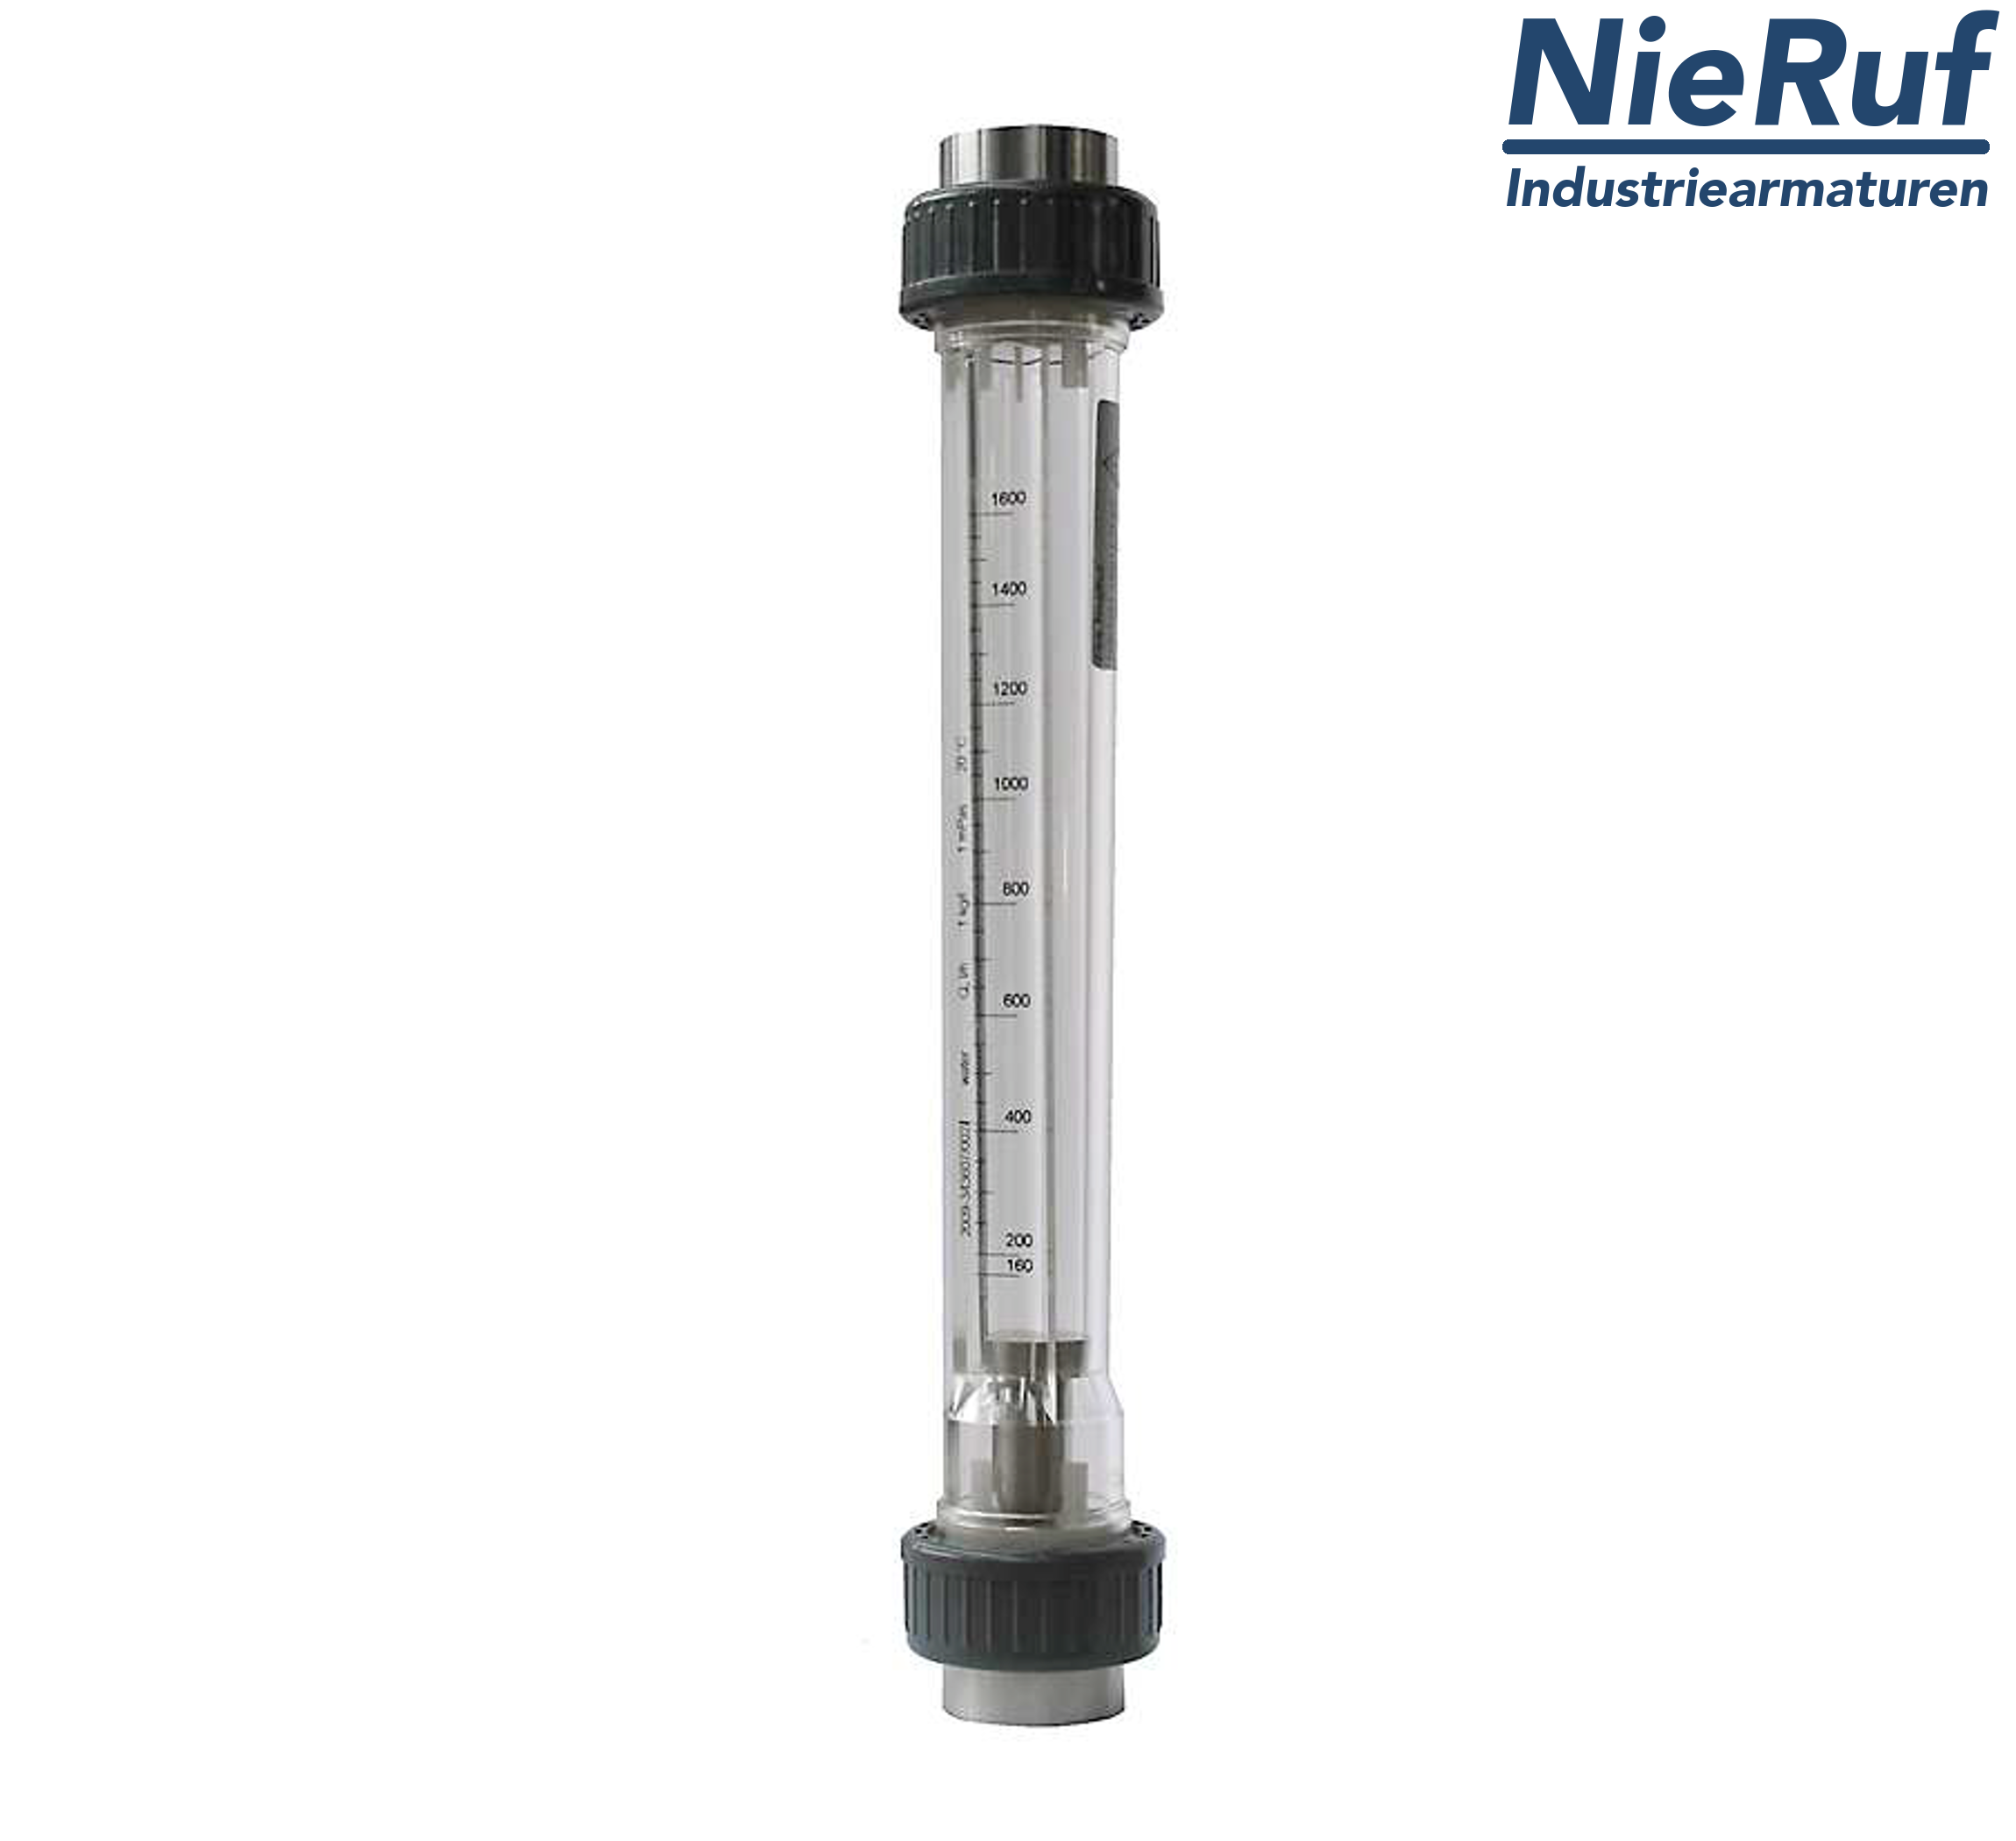 Variable area flowmeter 2" inch 6700.0 - 20000 l/h water NBR